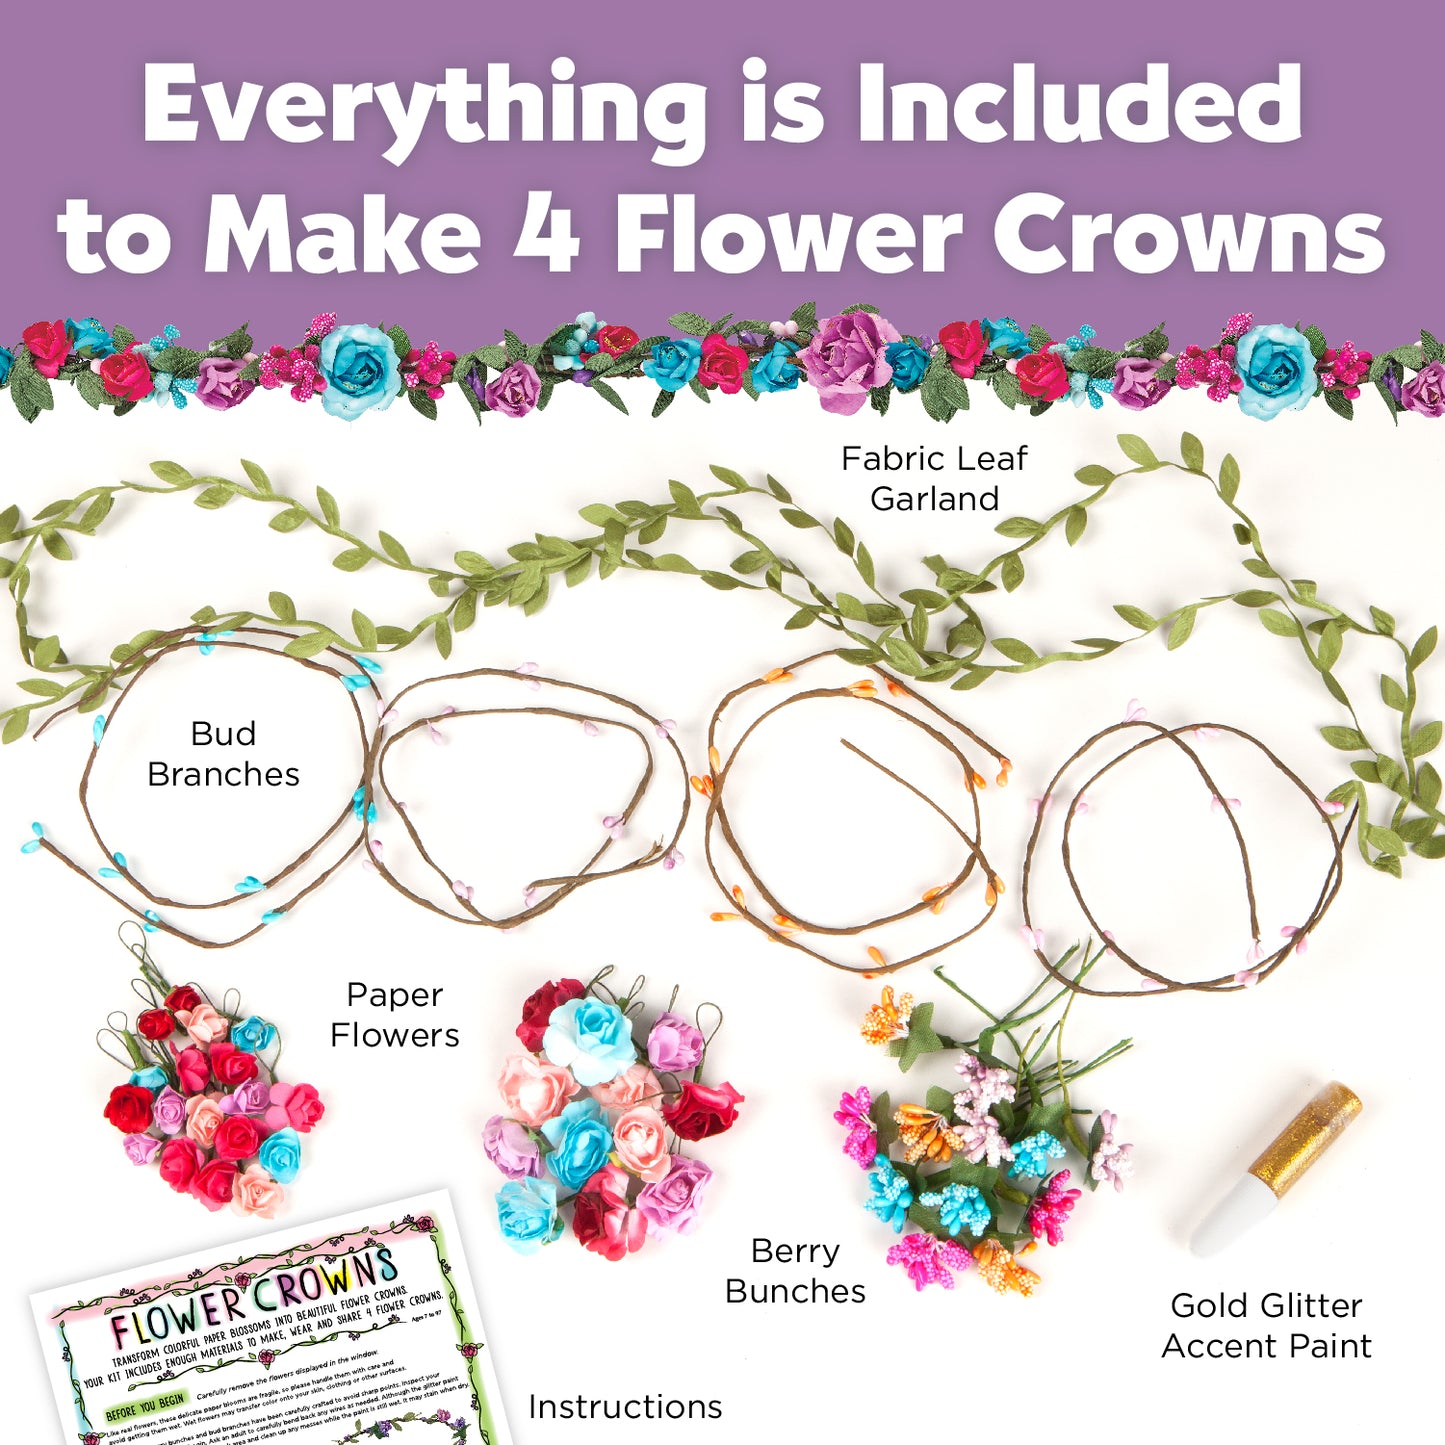 faber castell flower crown kit- consist of fabric leaf garland, paper flowers, bud branches, gold glitter and instructions